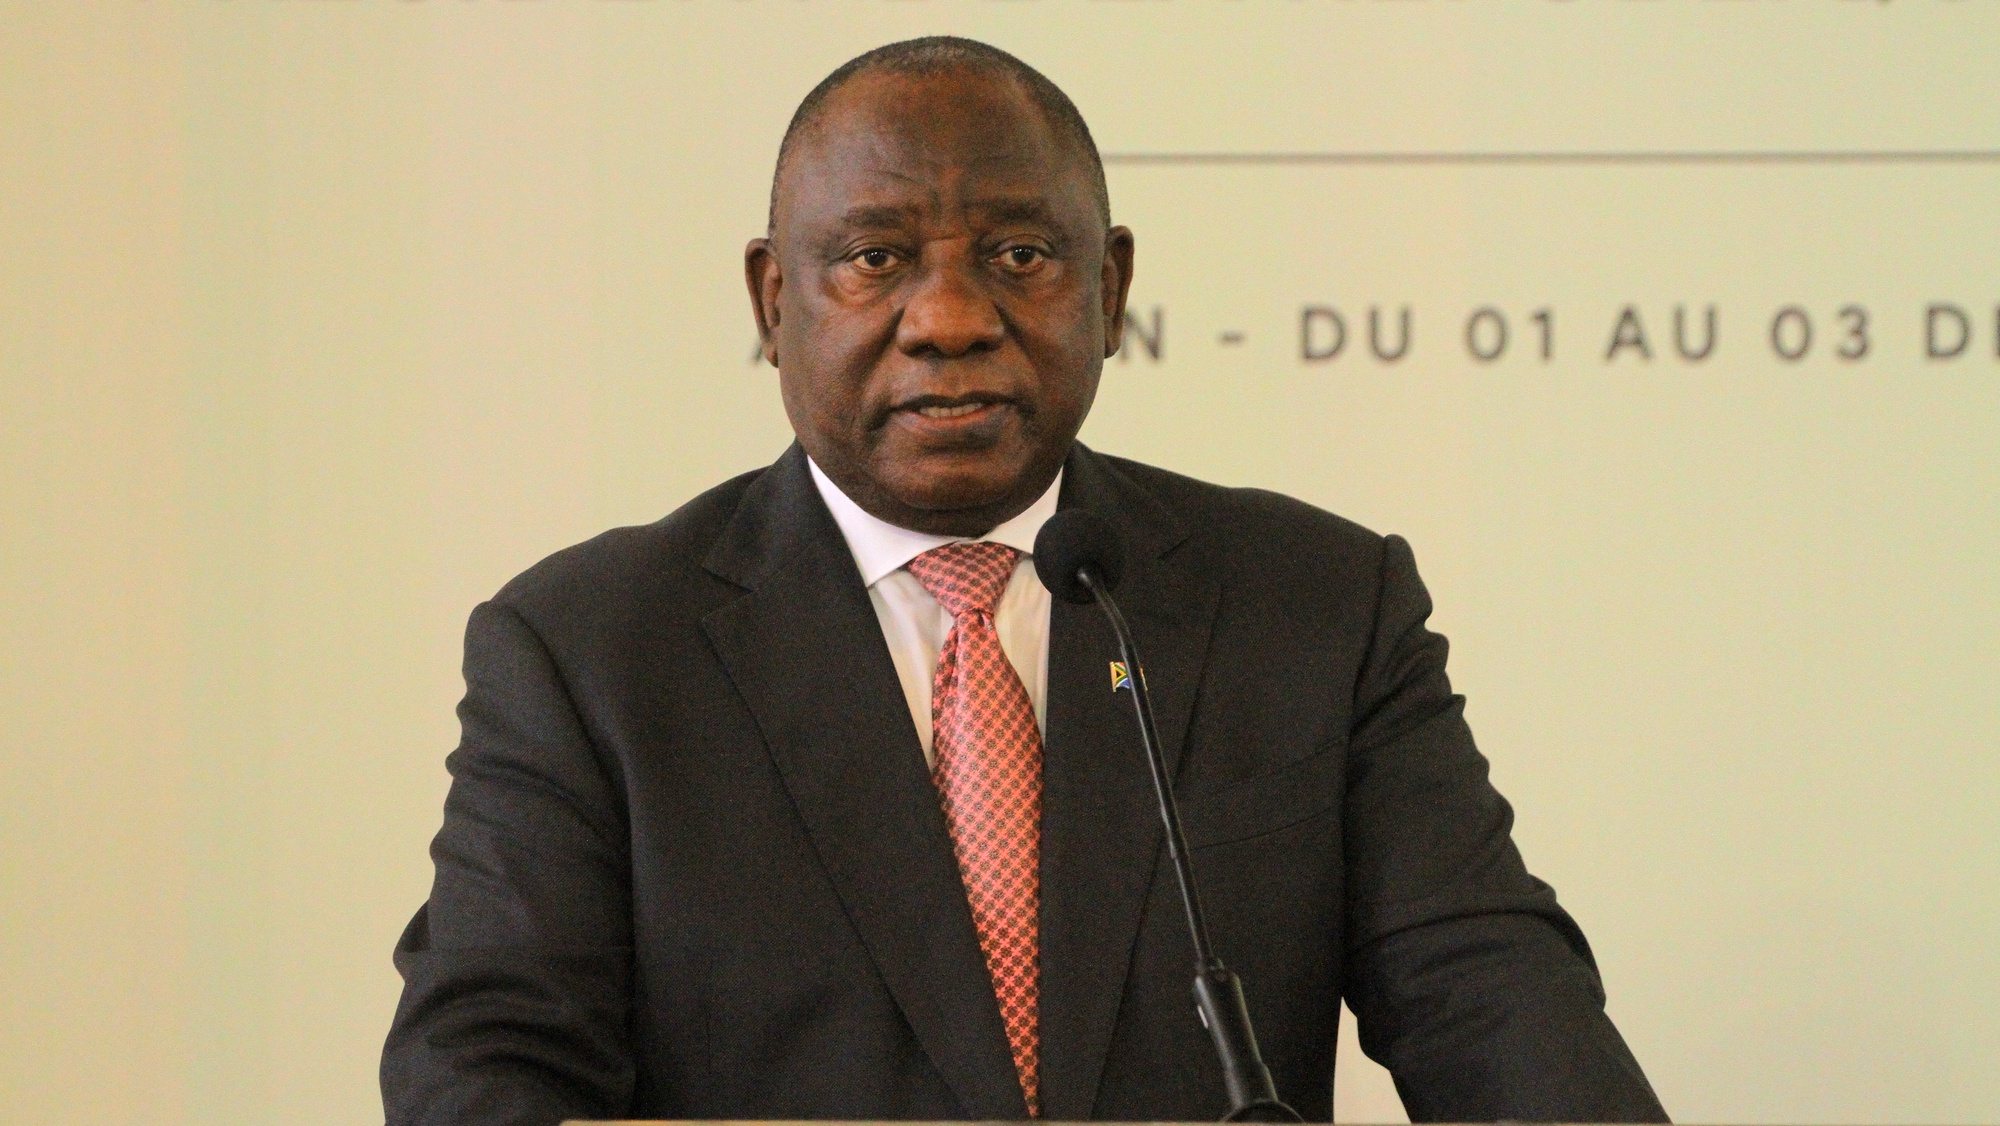 epa09616737 South African President Cyril Ramaphosa speaks during a joint press conference at the presidential palace in Abidjan, Ivory Coast, 02 December 2021. South African President Cyril Ramaphosa arrived in Abidjan for a 72-hour official visit. This visit is part of the strengthening of bilateral relations between South Africa and the Ivory Coast.  EPA/LEGNAN KOULA